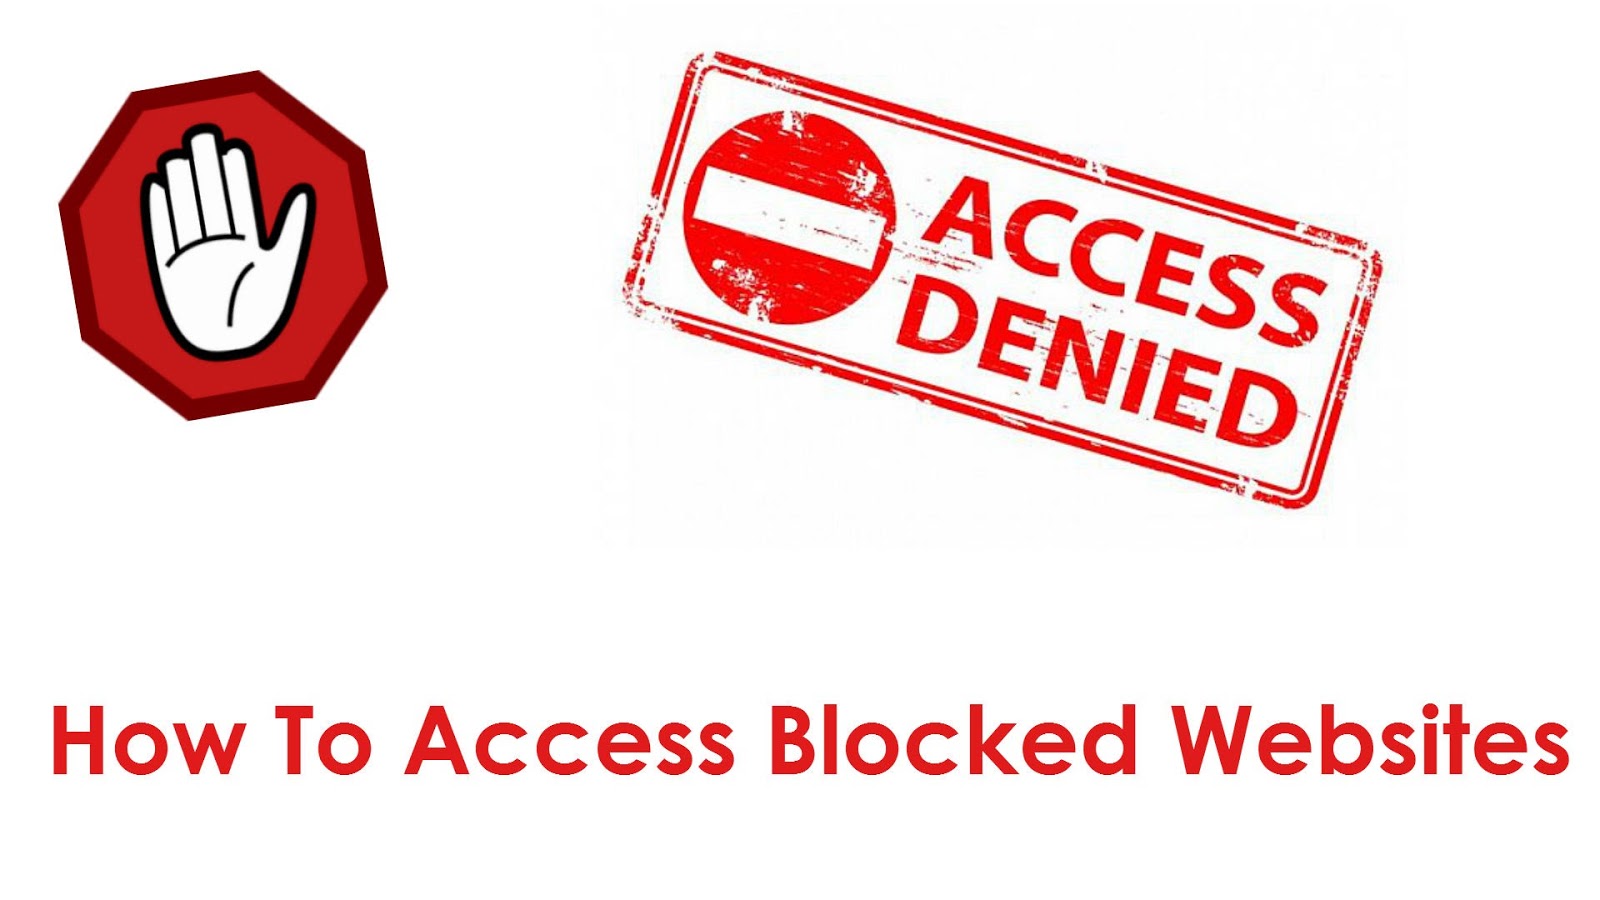 Https youtube com t restricted access blocked